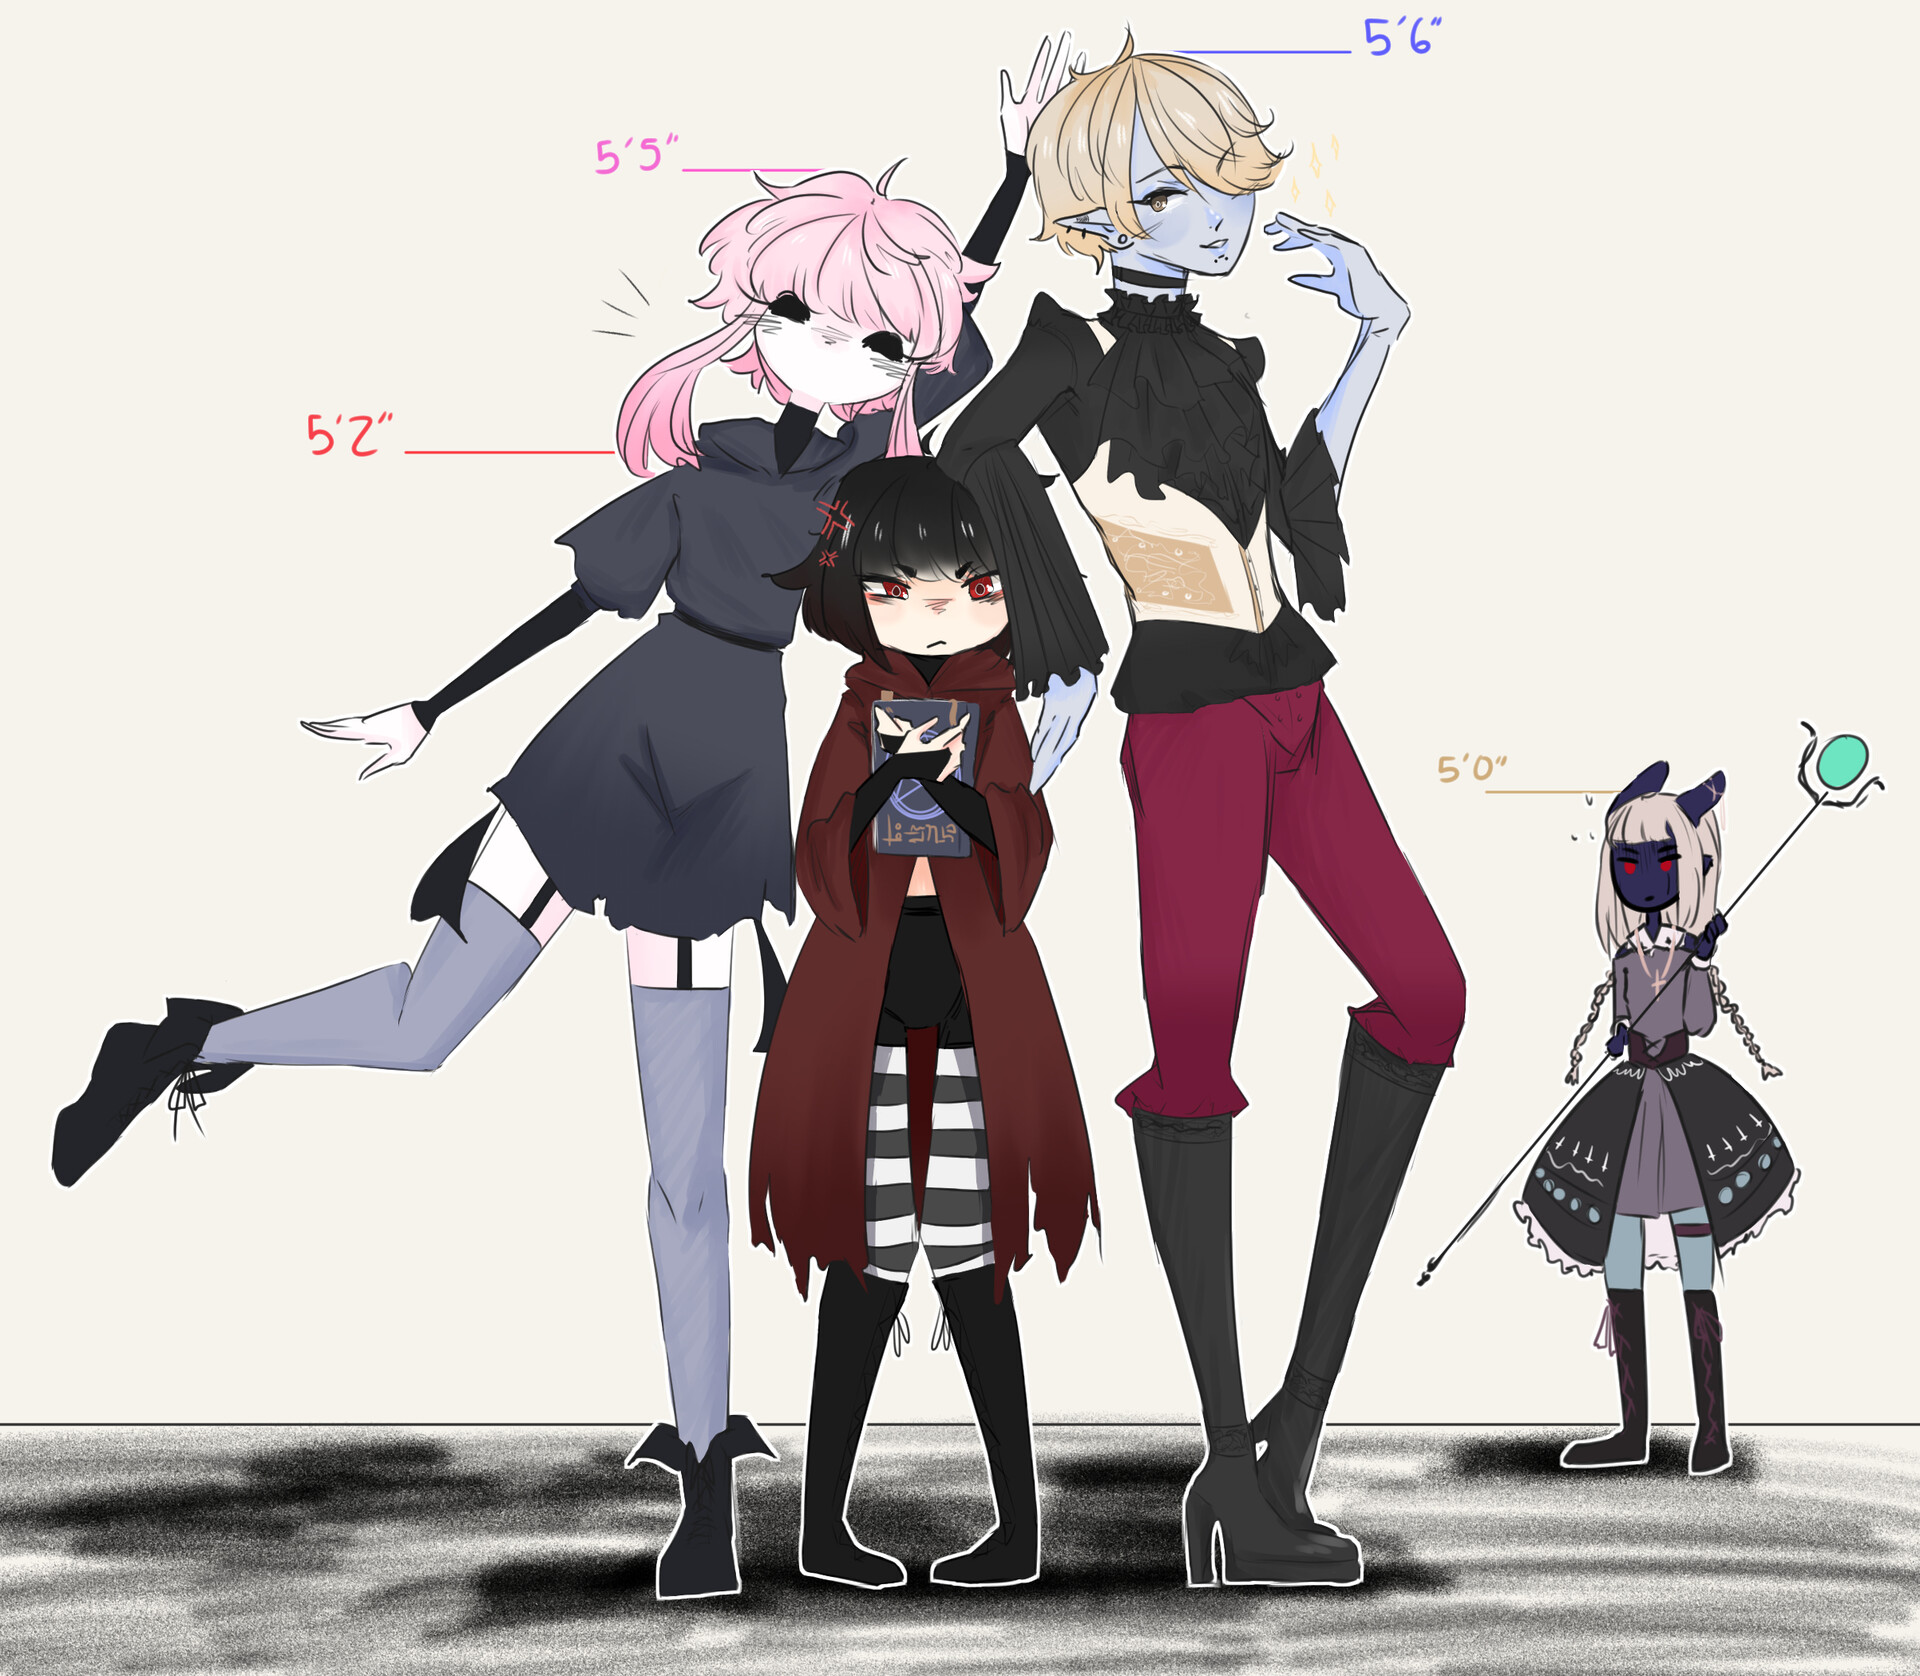 21 Of The Tallest Anime Characters Youll Ever Come Across